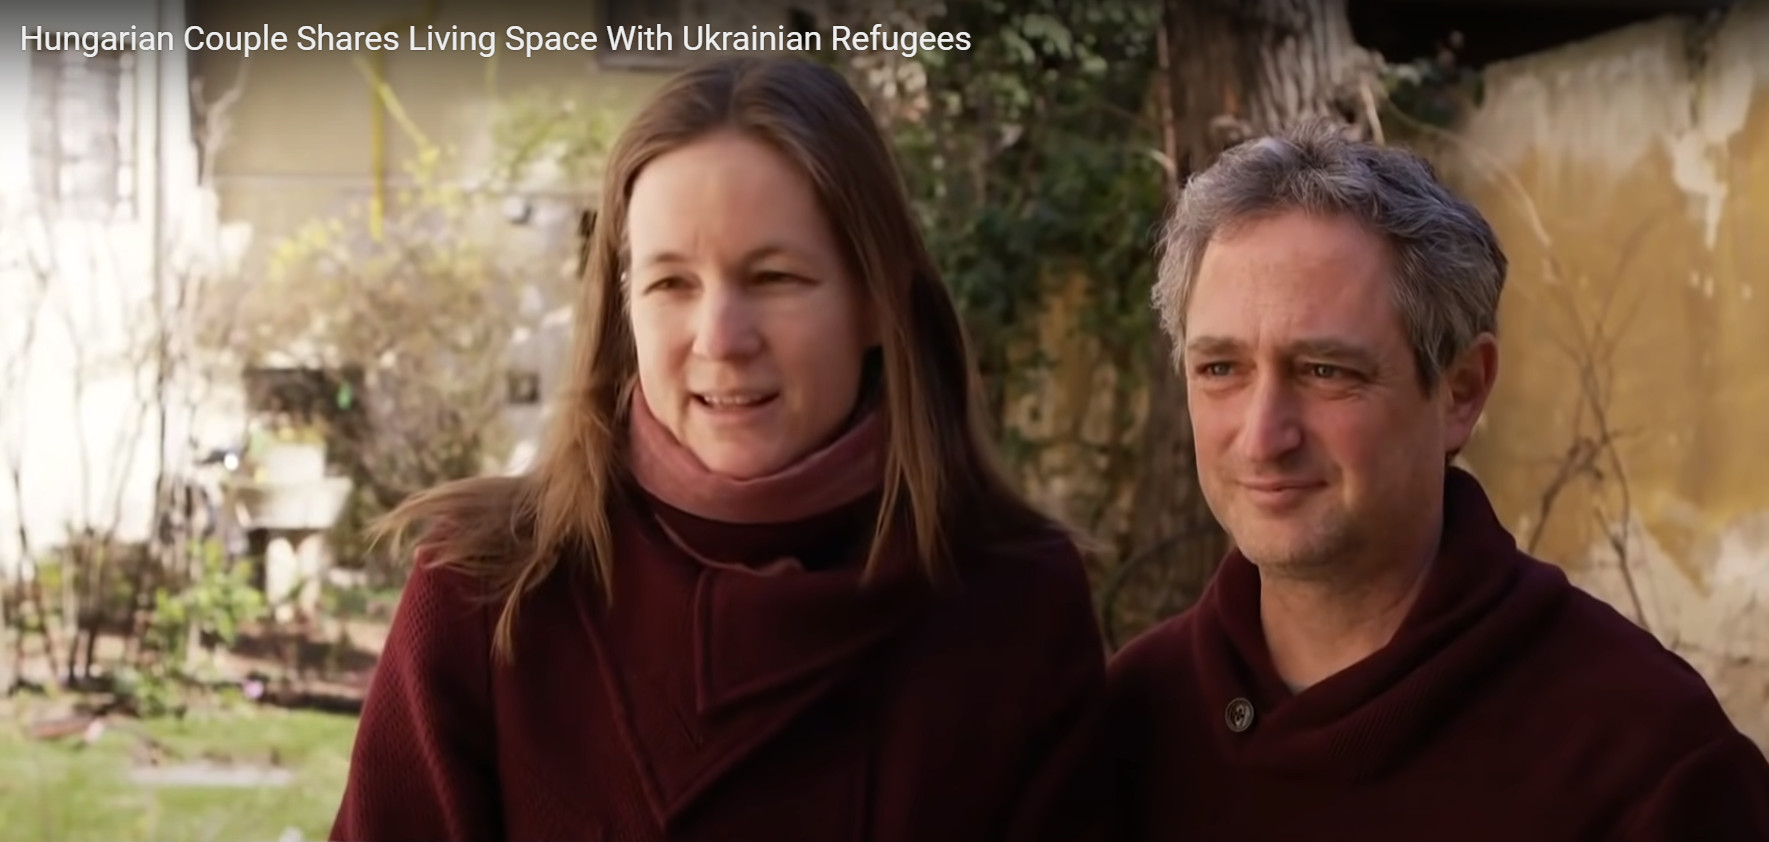 Watch: Hungarian Couple Shares Living Space With Ukrainian Refugees